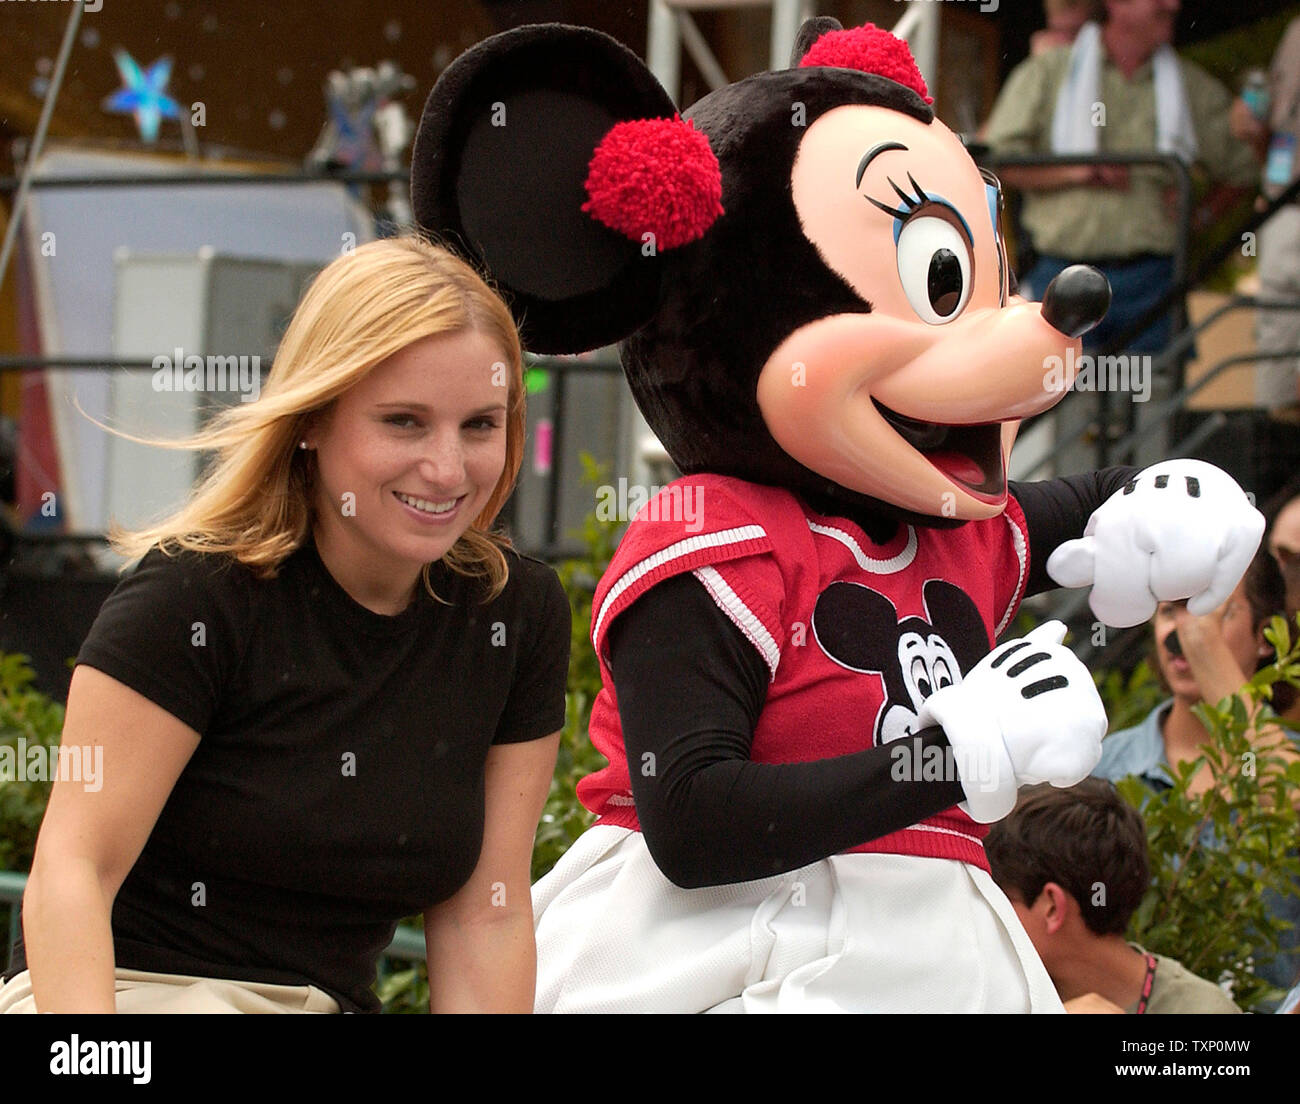 Olympic Gold Medalist, Kerri Strug is accompanied by Minnie Mouse during the celebrity motorcade on July 31, 2004 at Disney's MGM Studios in Orlando, Florida, during the ESPN 25th anniversary celebration. (UPI Photo Marino / Cantrell) Stock Photo